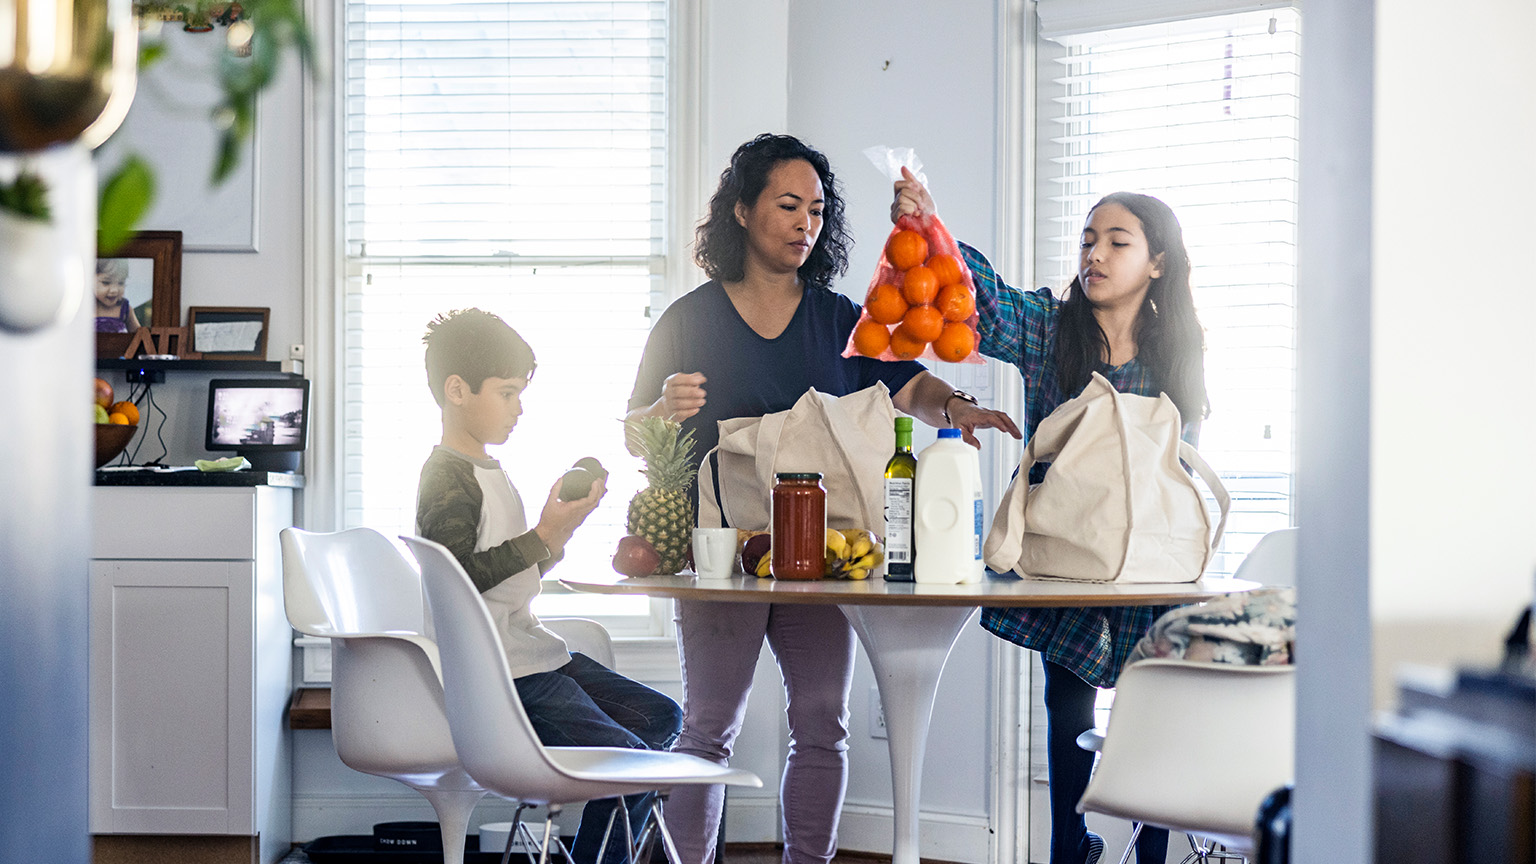 A mother is unpacking groceries at a contemporary pedestal table with her two children. Her daughter picks up a bag of oranges while her son examines some plums.